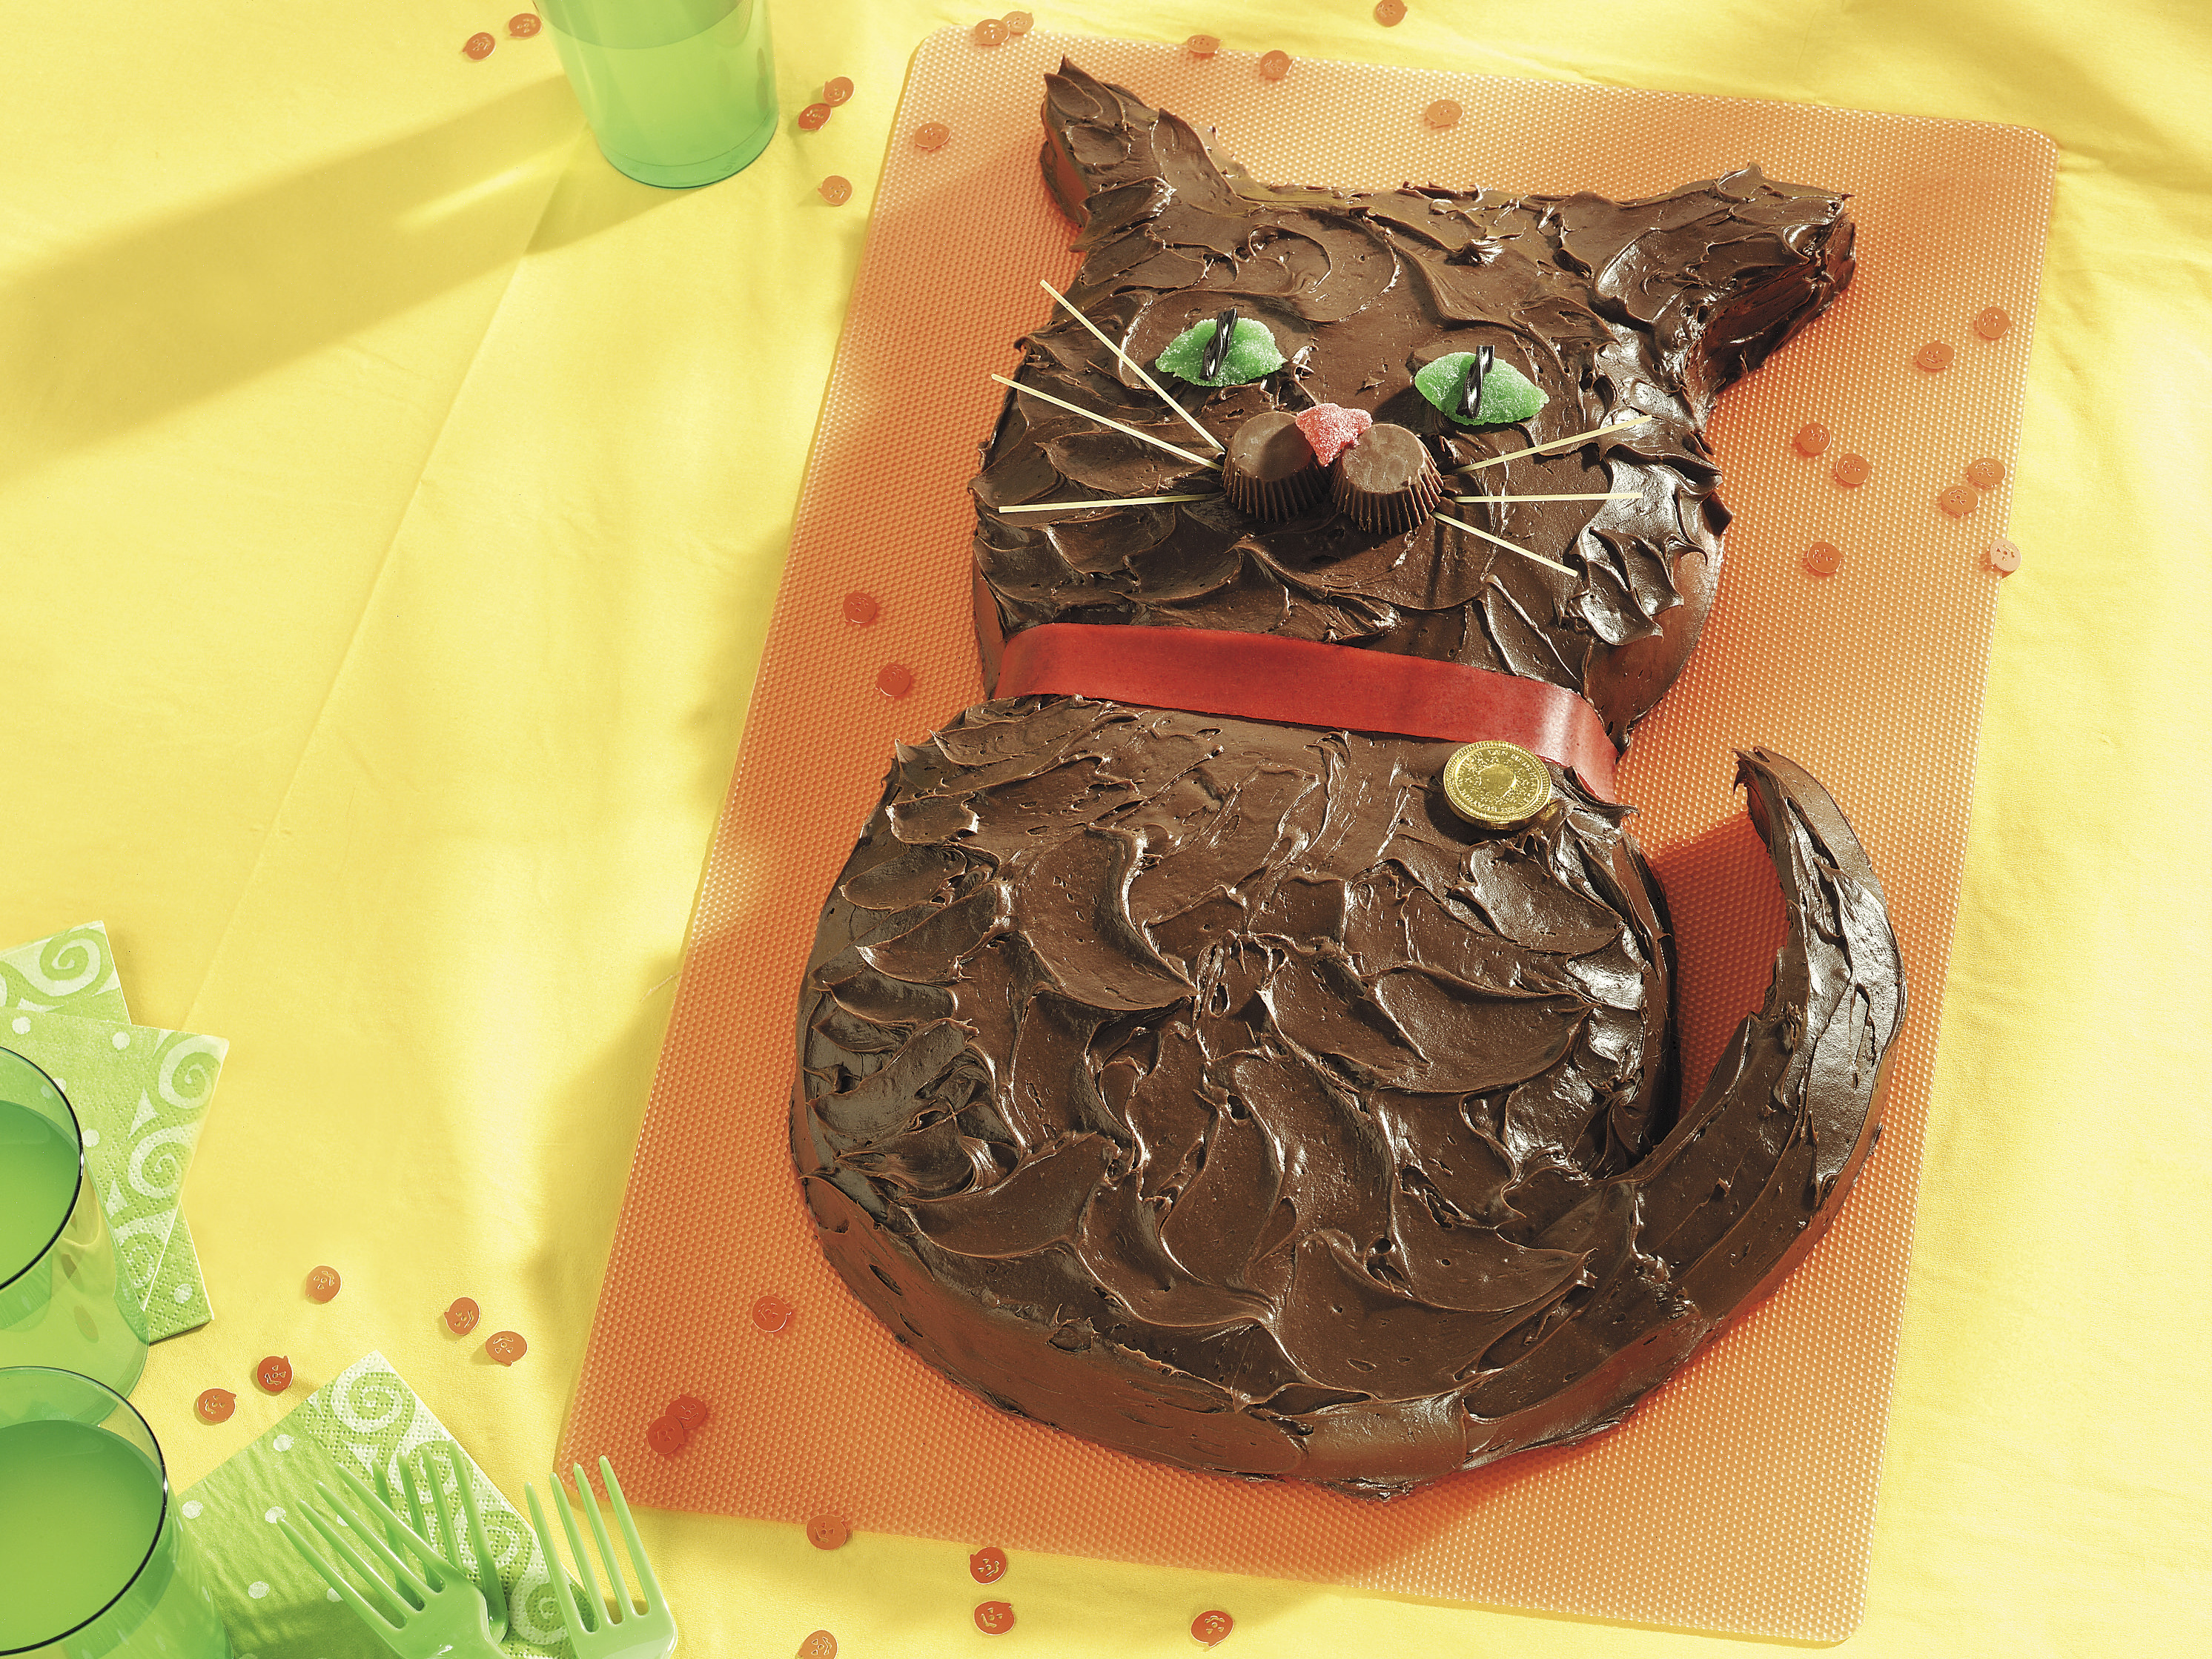 How to Make an Easy Cat Cake | Birthday cake for cat, Cat cake, Cake shapes